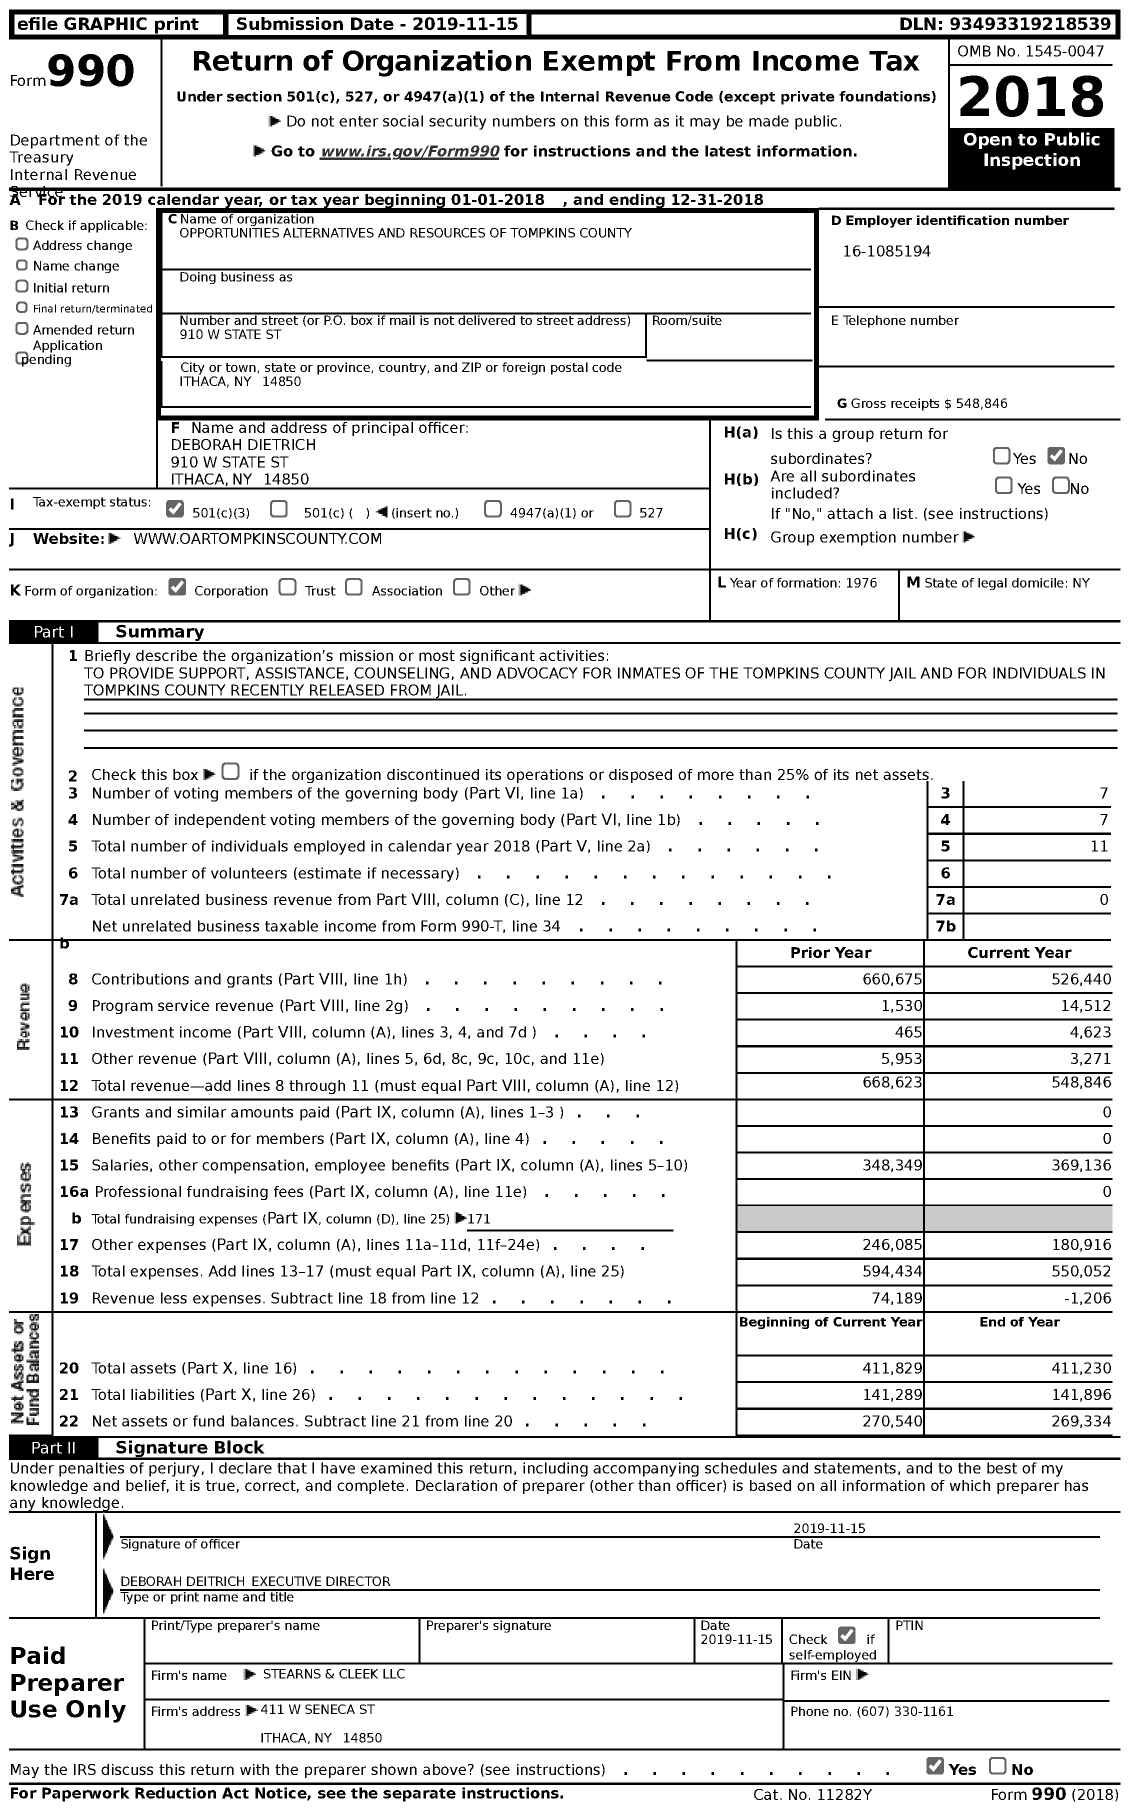 Image of first page of 2018 Form 990 for Opportunities Alternatives and Resources of Tompkins County